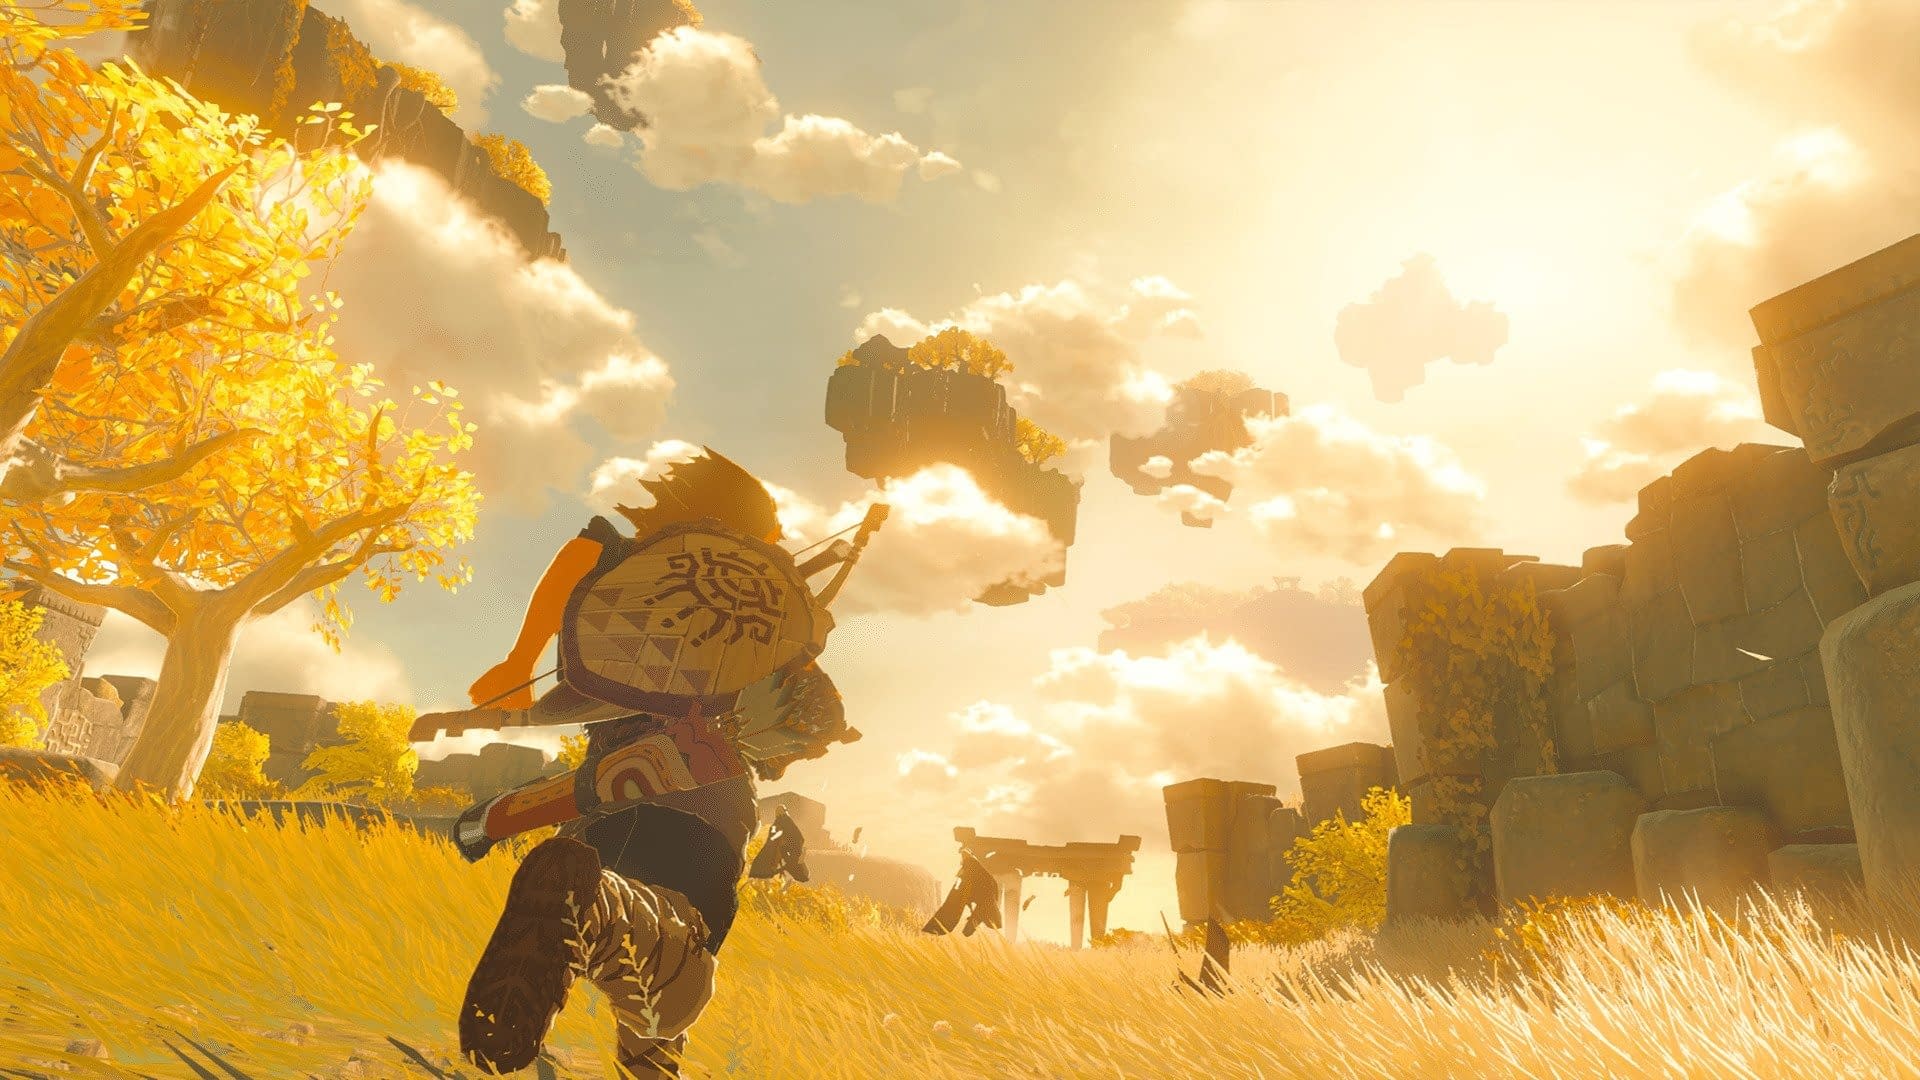 Is Zelda Series-based Film Comes? The Lighting Team Replyed